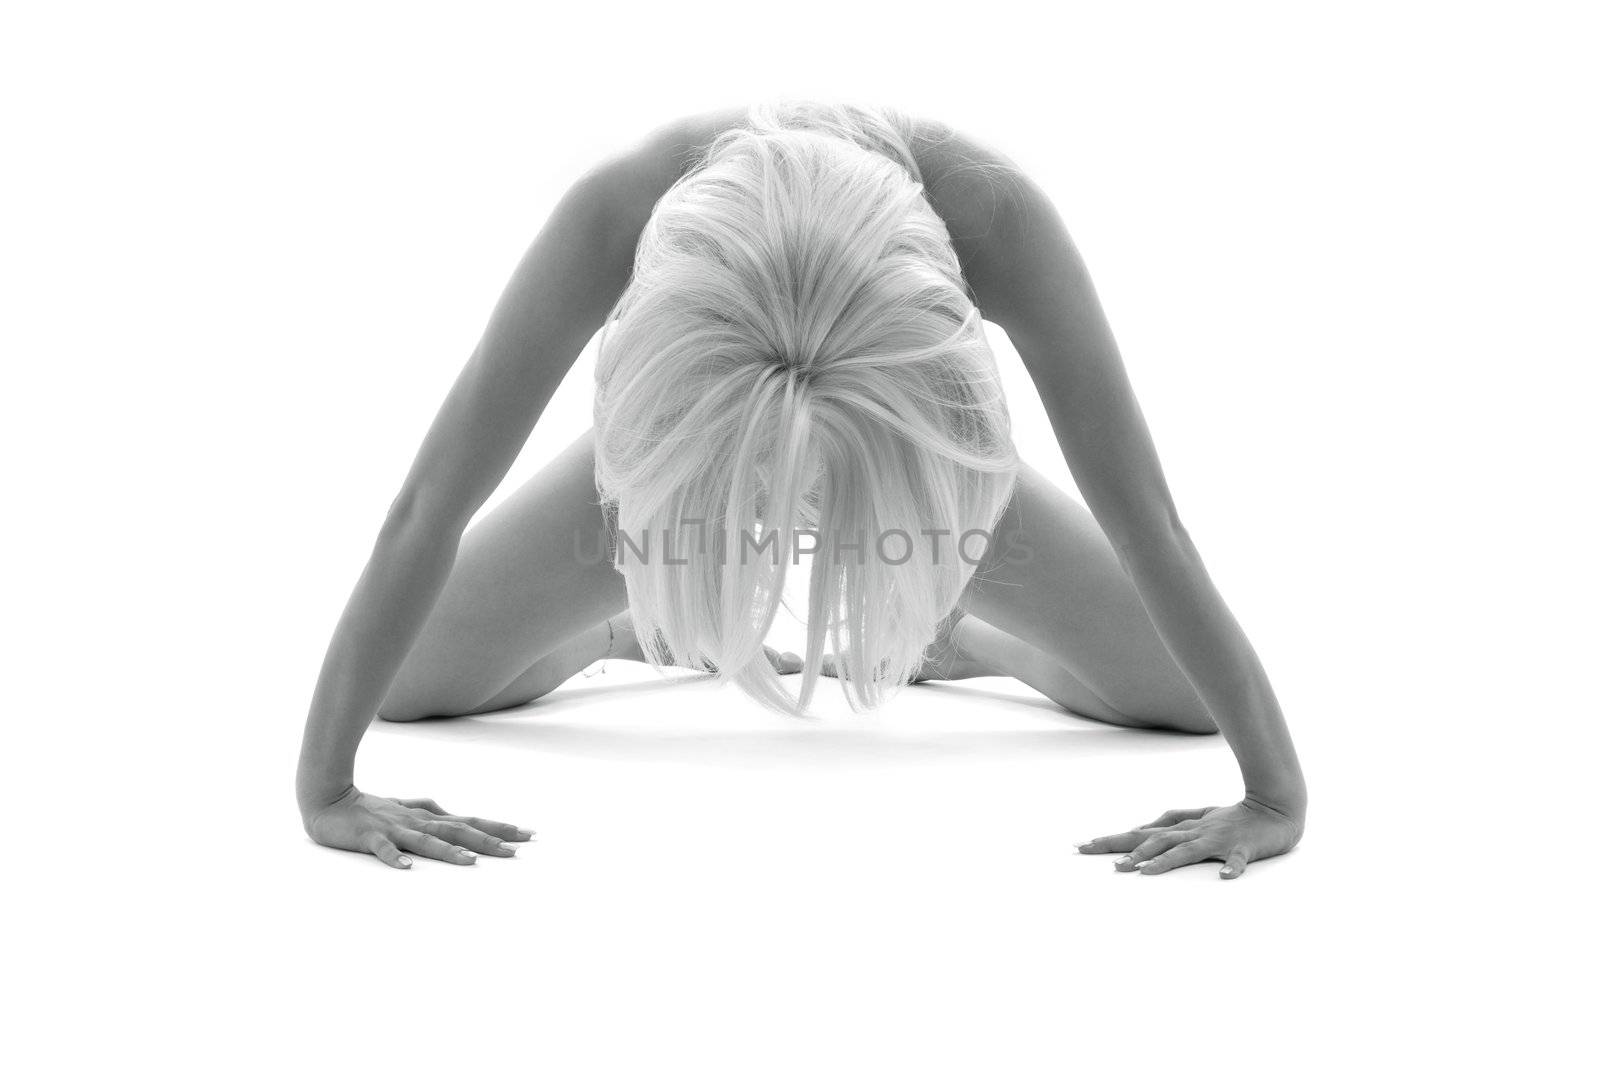 classical monochrome artistic nudity style picture of woman